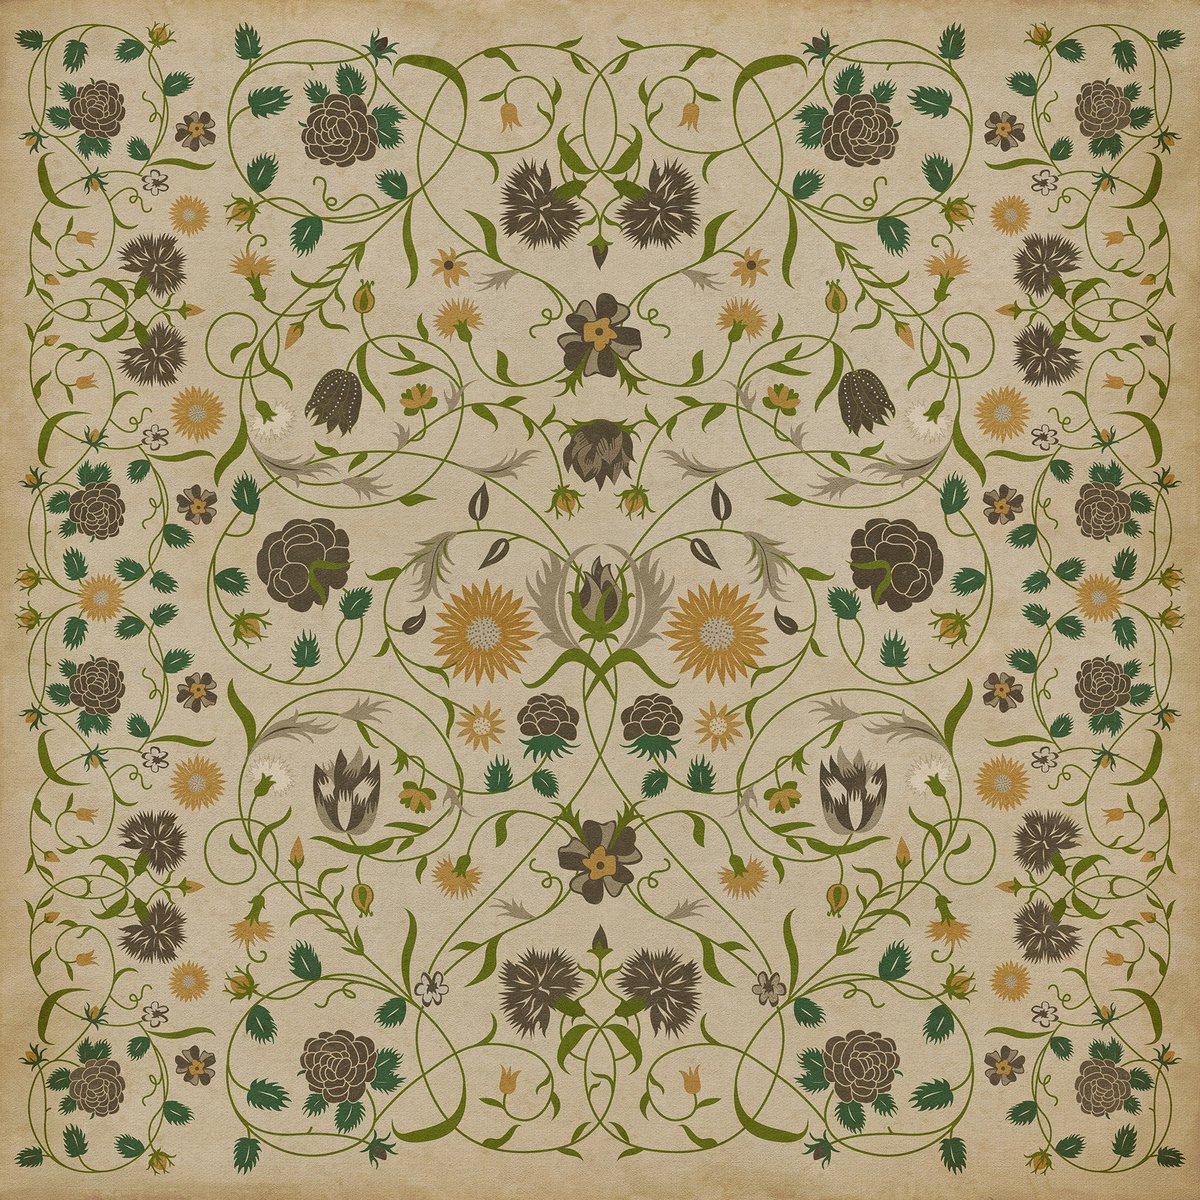 Spicher and Company Williamsburg Vintage Vinyl Floral Rugs | Rugs Direct